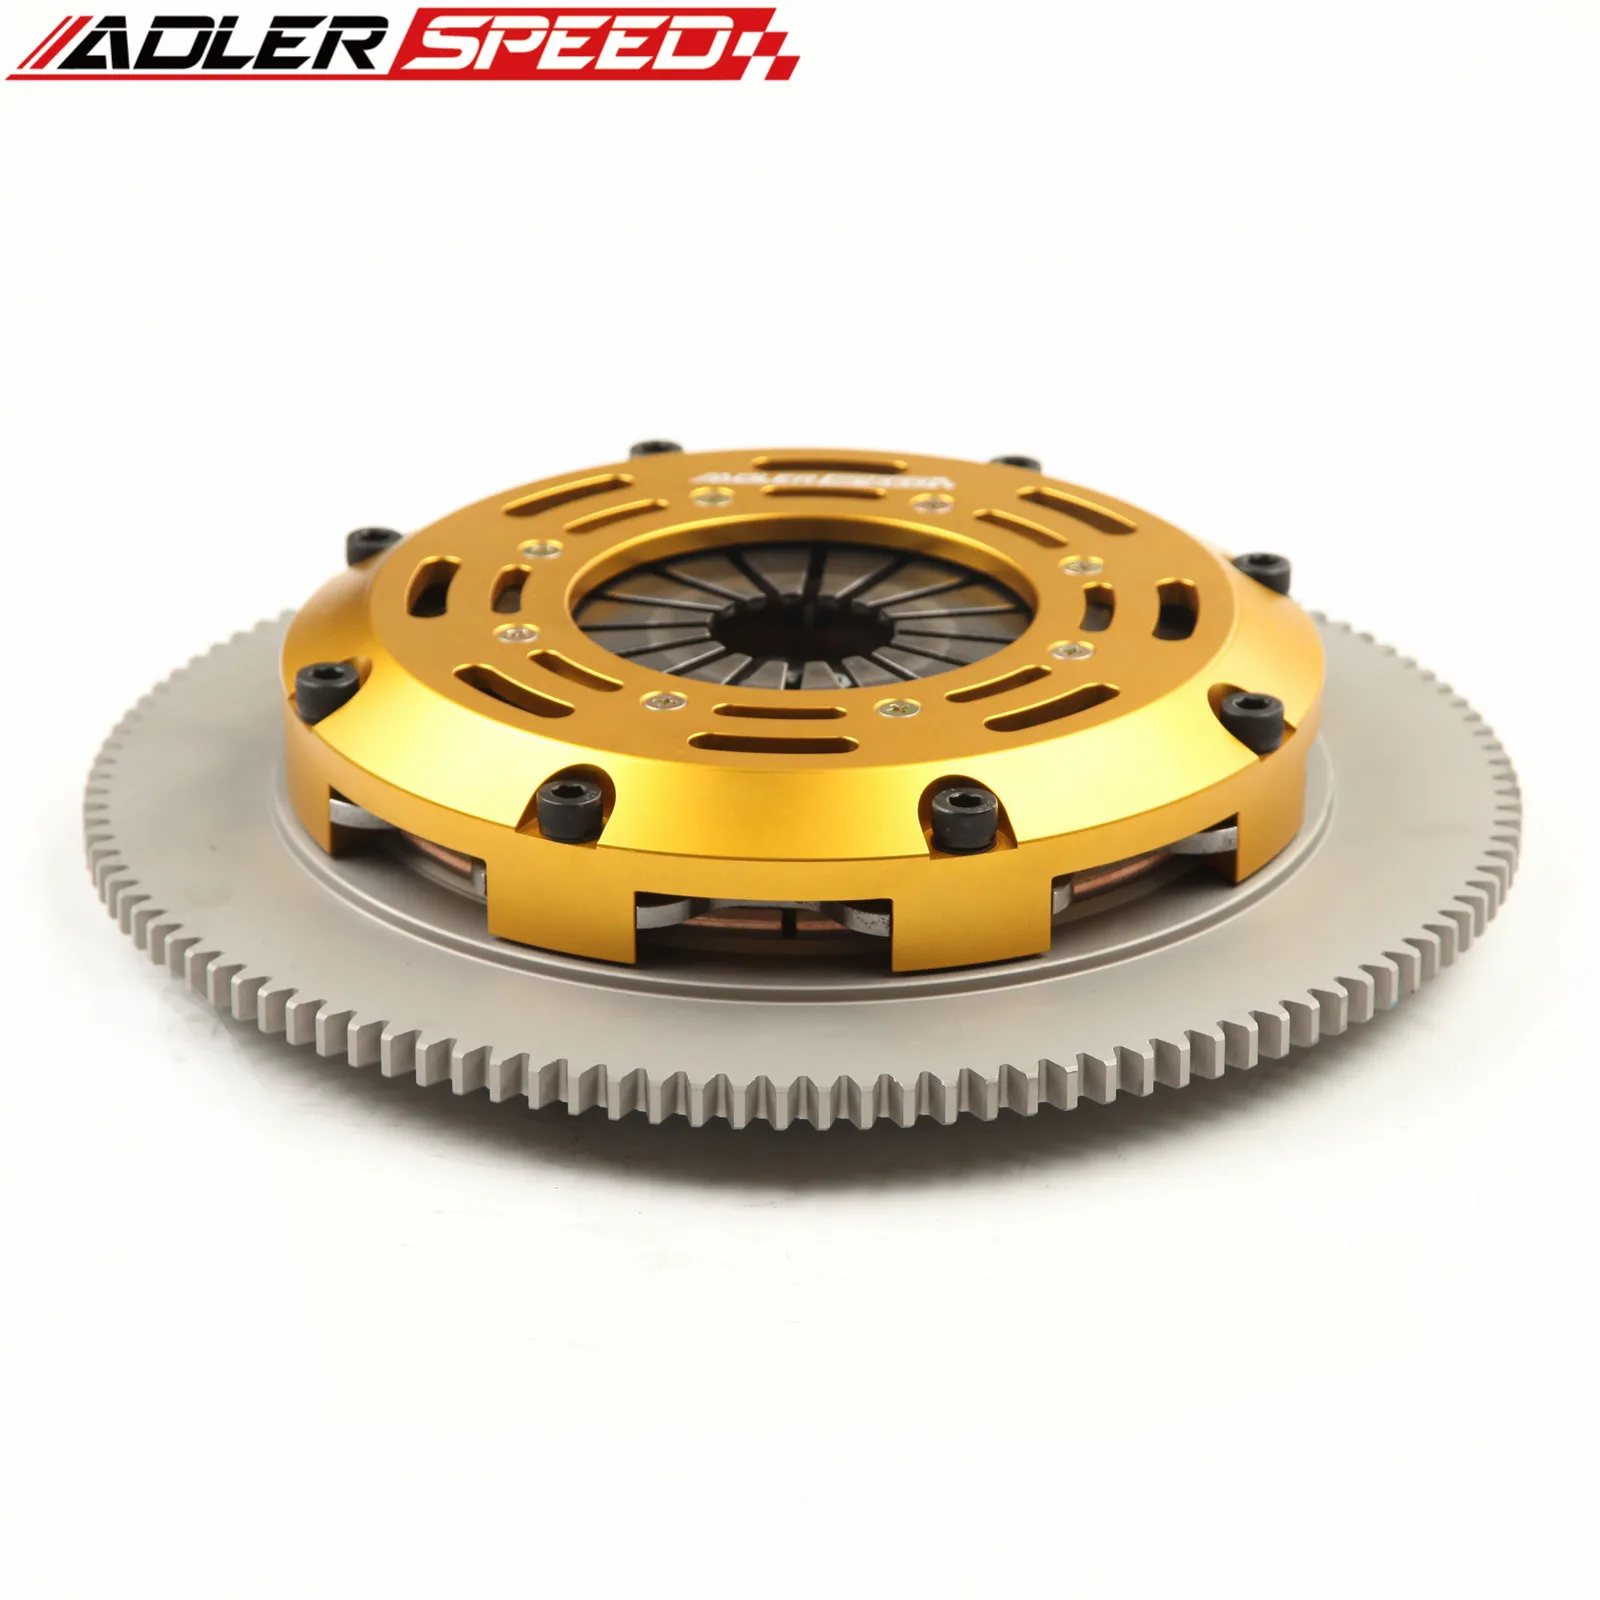 

ADLERSPEED Racing Clutch Single Disc Kit For 77-85 Toyota Celica ST; GT; GTS 2.2L 2.4L SOHC 4cyl